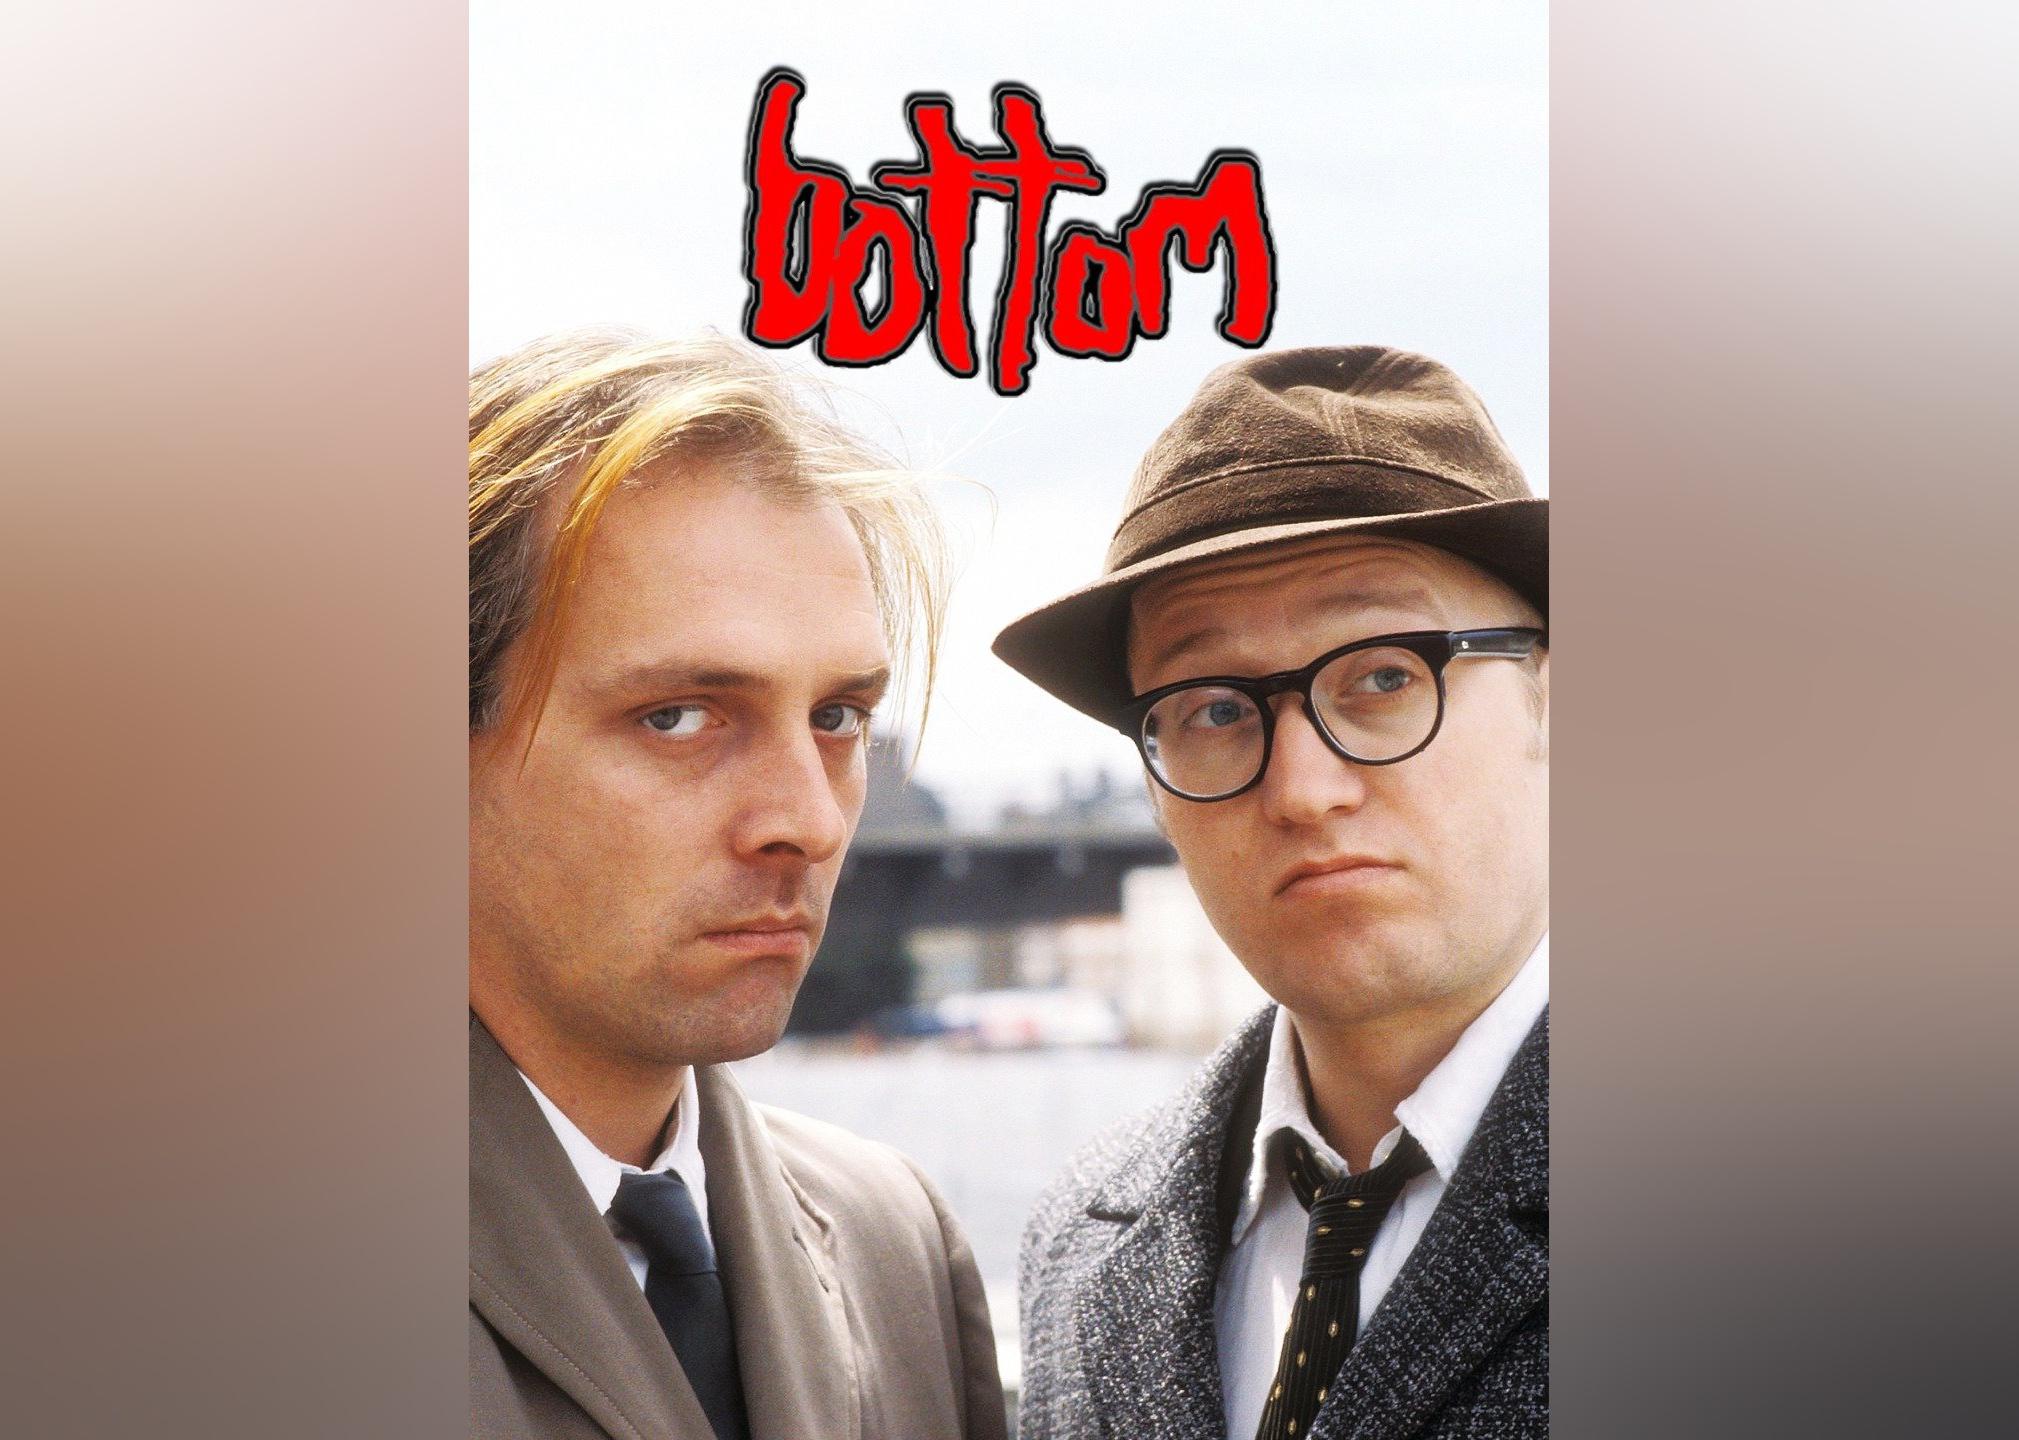 Two men in suits on the TV poster for Bottom.